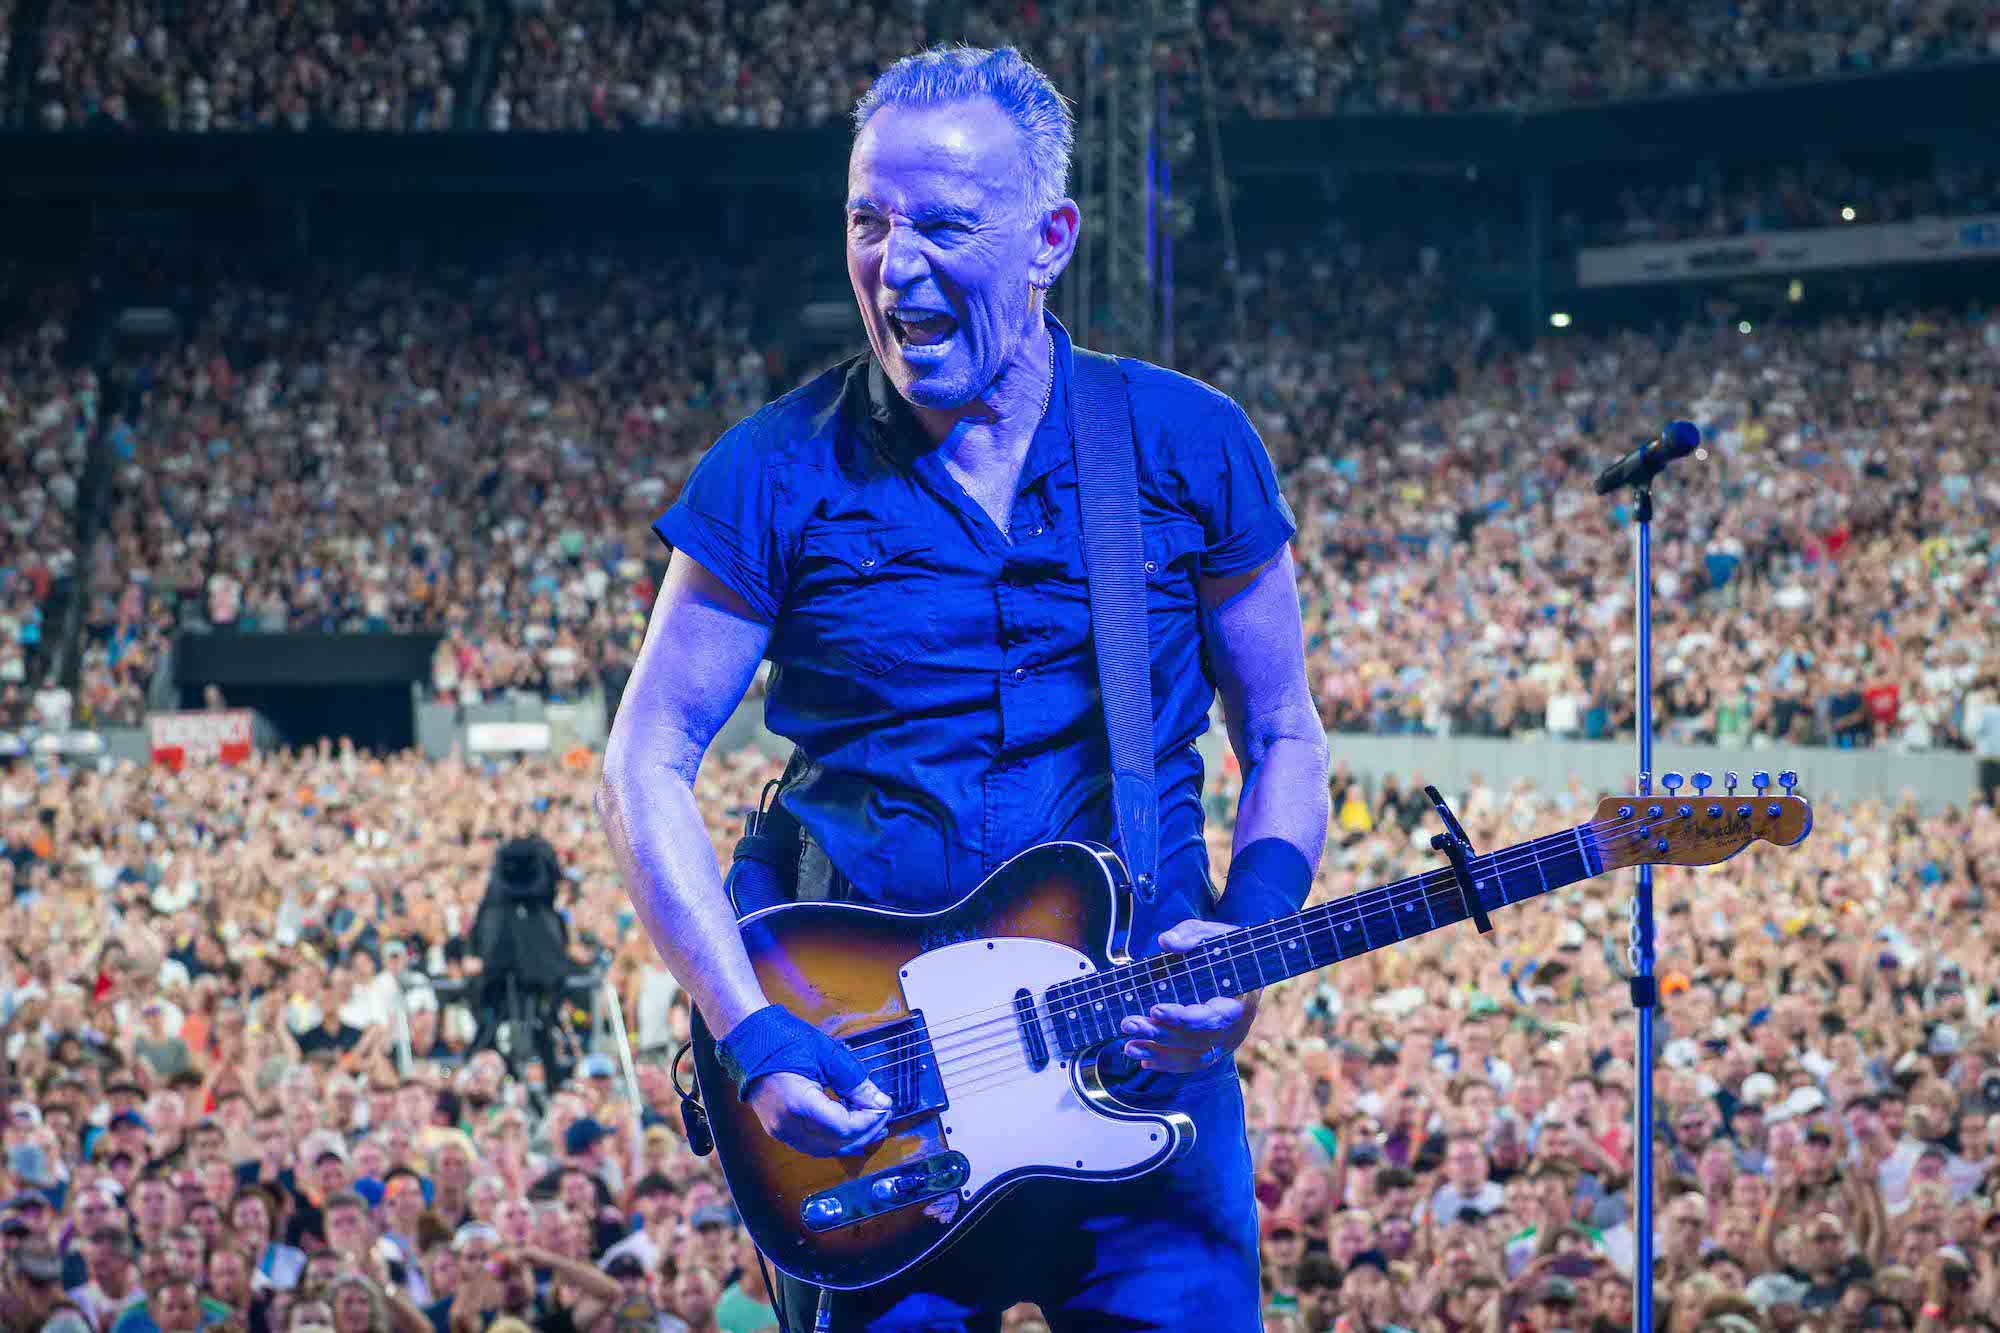 Bruce Springsteen & E Street Band at MetLife Stadium, East Rutherford, New Jersey on September 3, 2023.